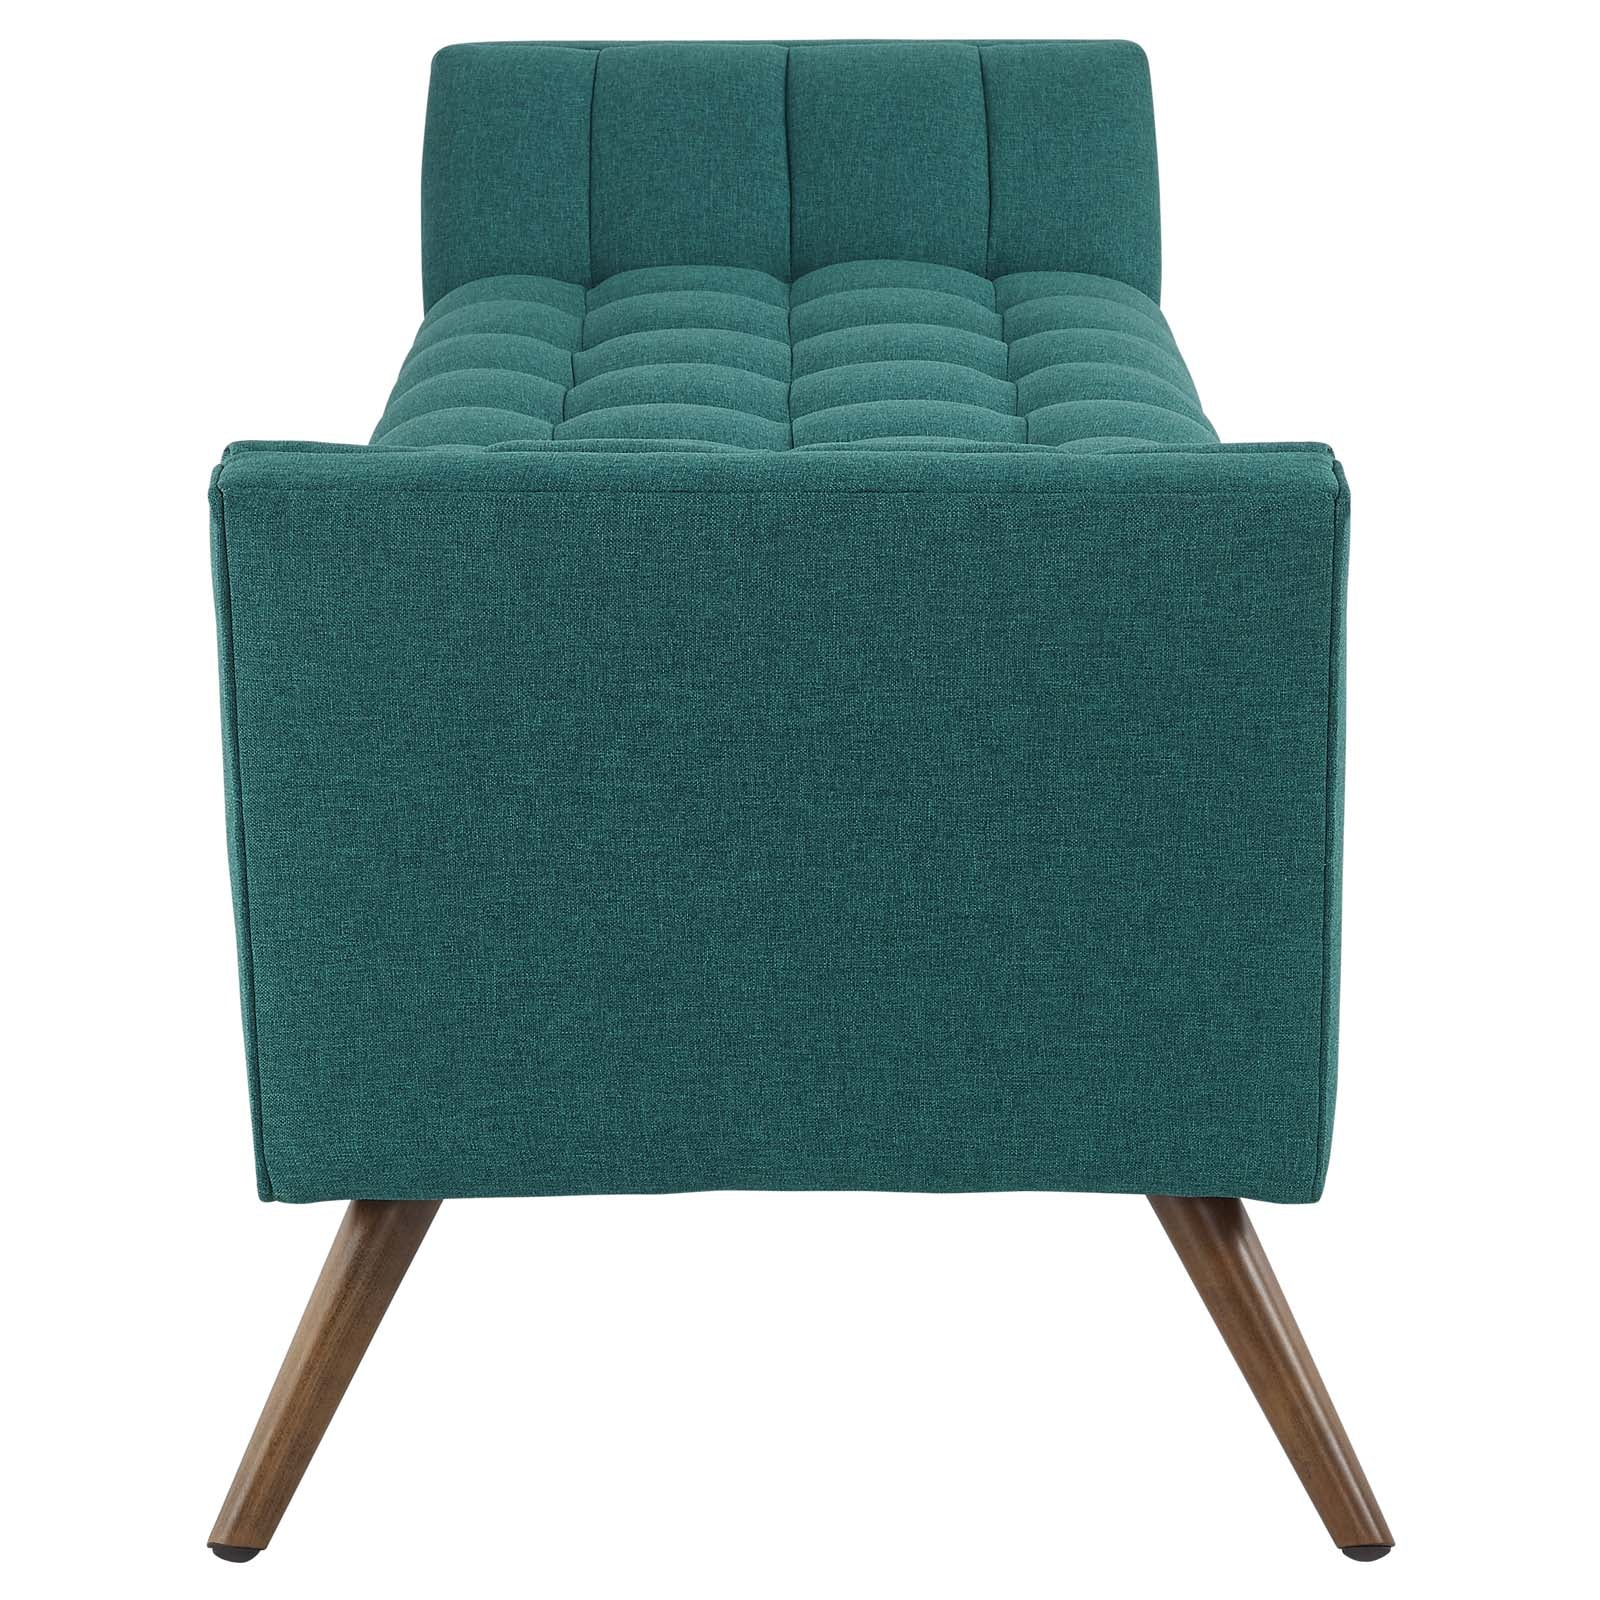 Modway Benches - Response Upholstered Fabric Bench Teal